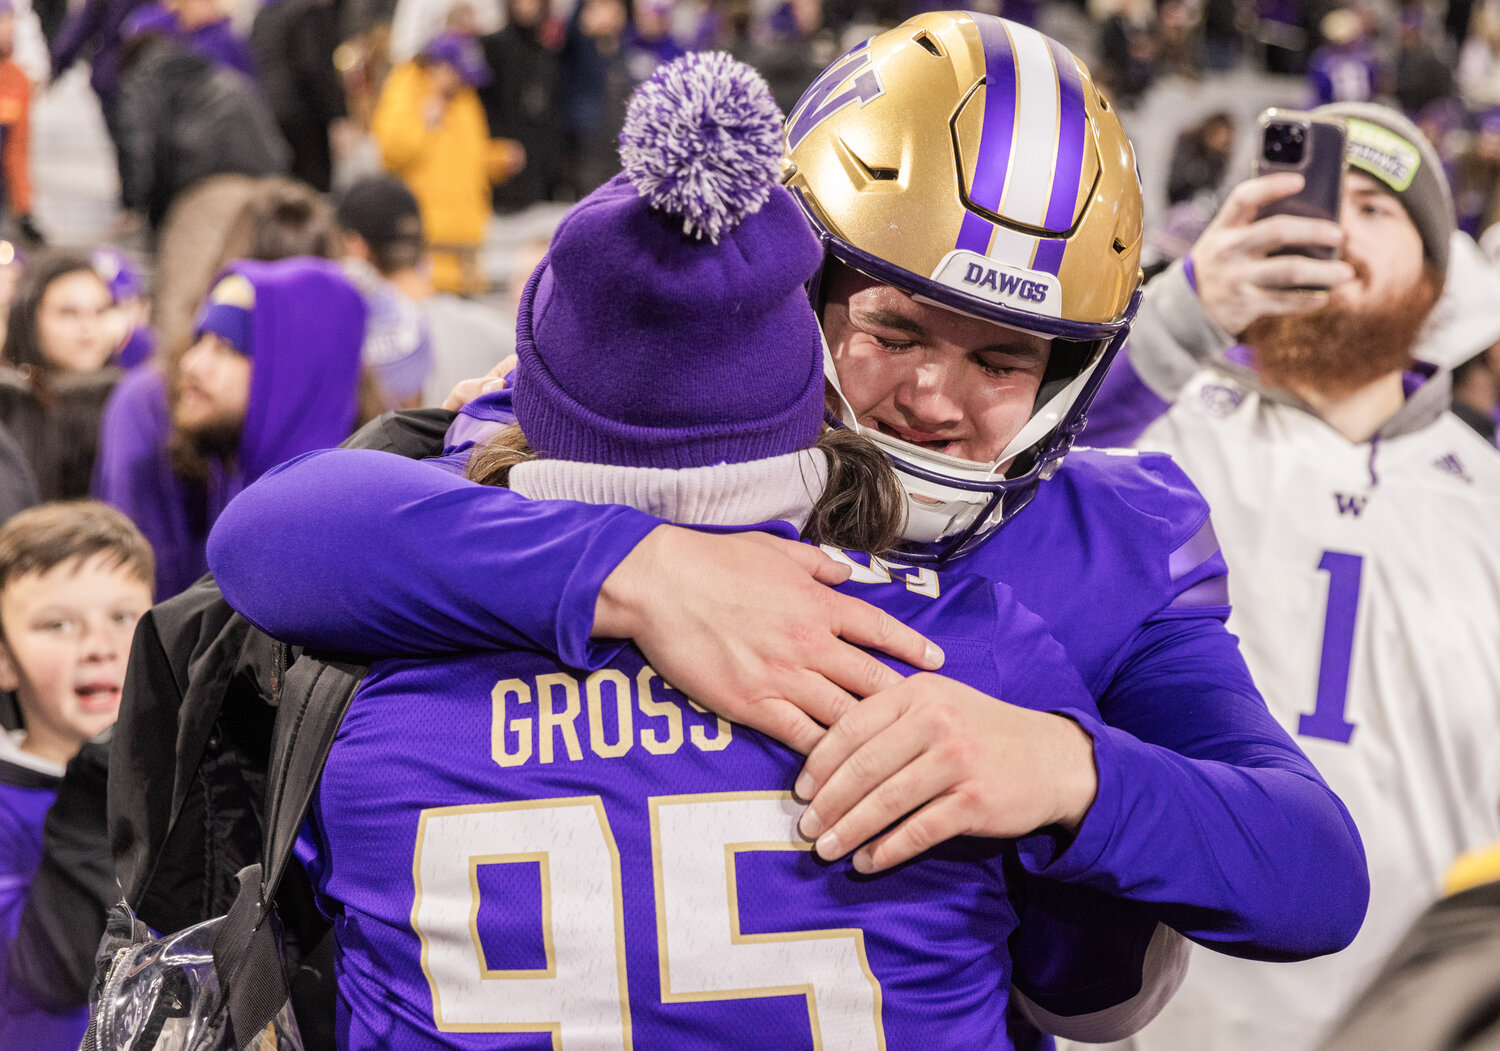 Huskies kicker Grady Gross receives an embrace after scoring the winning field goal during the Boeing Apple Cup Series football game in Seattle against the Washington State University Cougars on Saturday, Nov. 25.